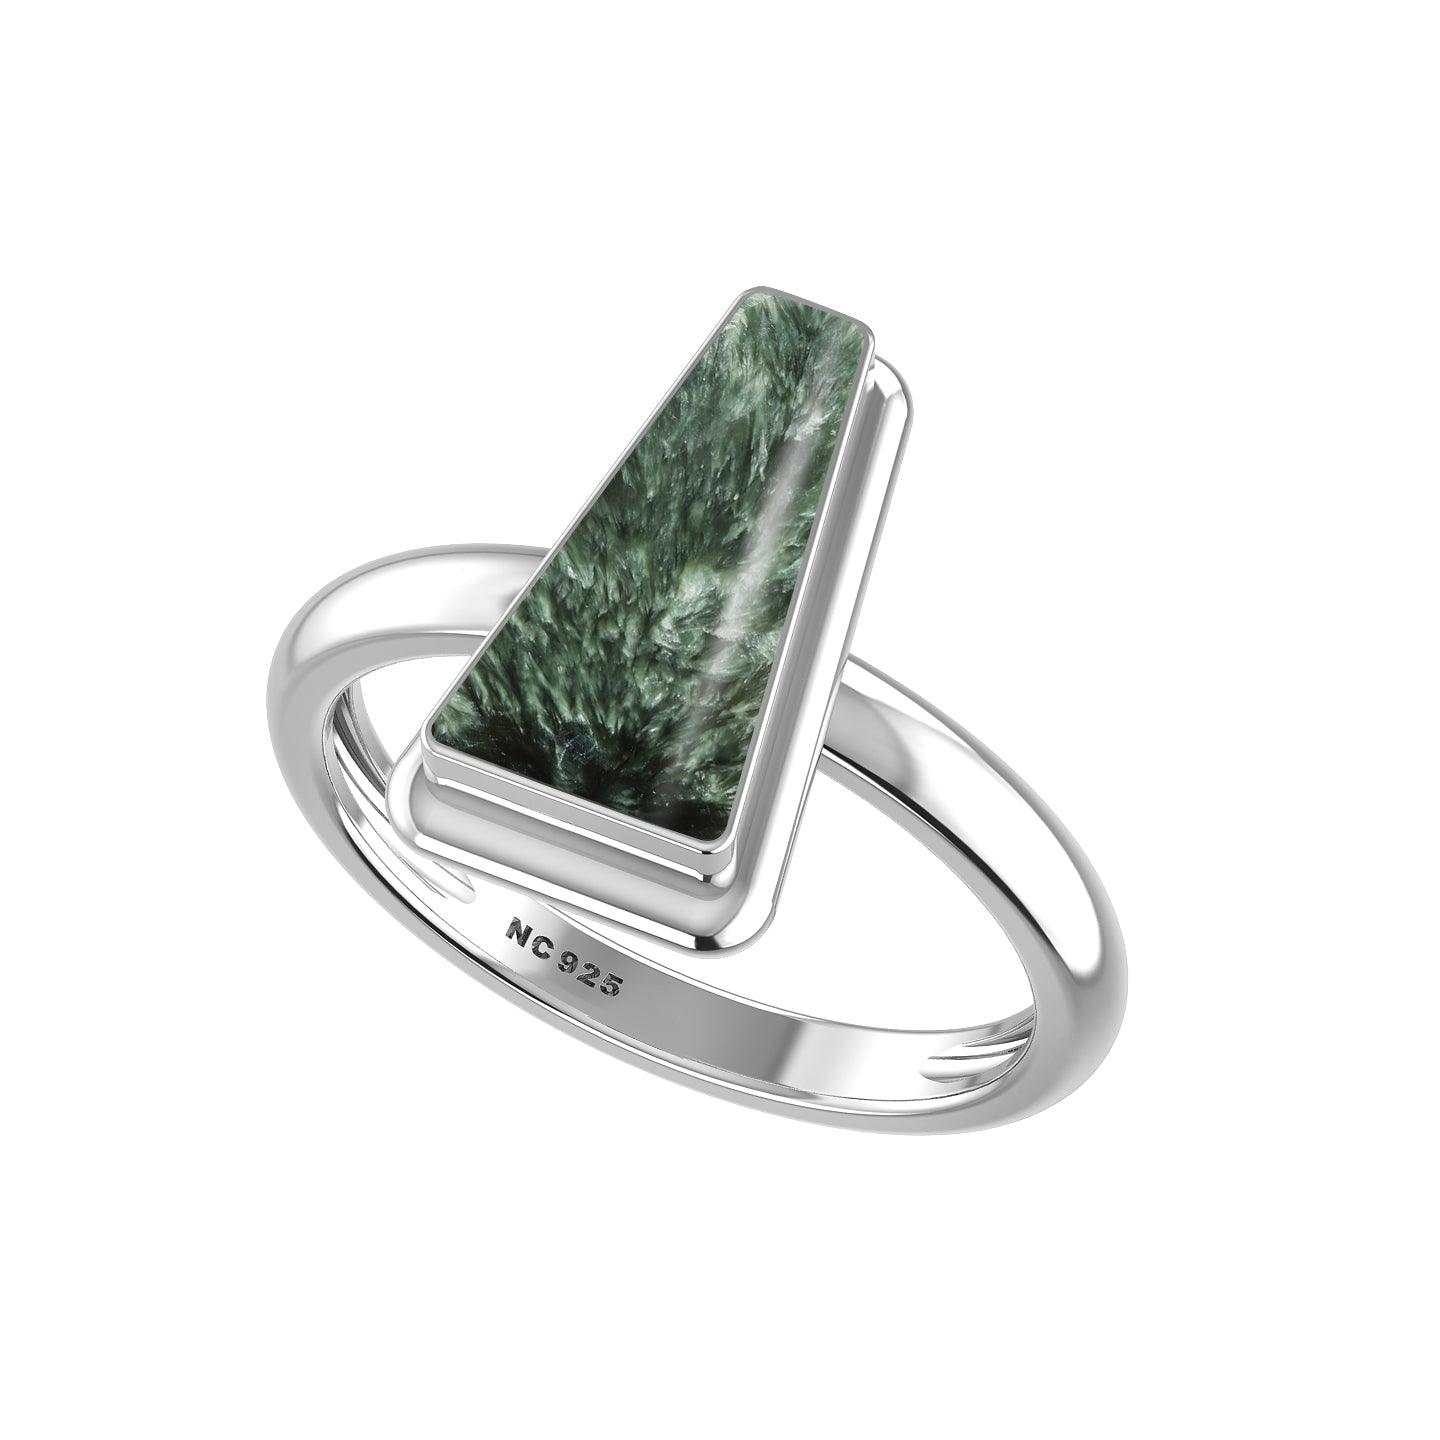 Natural Seraphinite Ring 925 Sterling Silver Bezel Set Handmade Jewelry Pack of 6 - (Box 4)